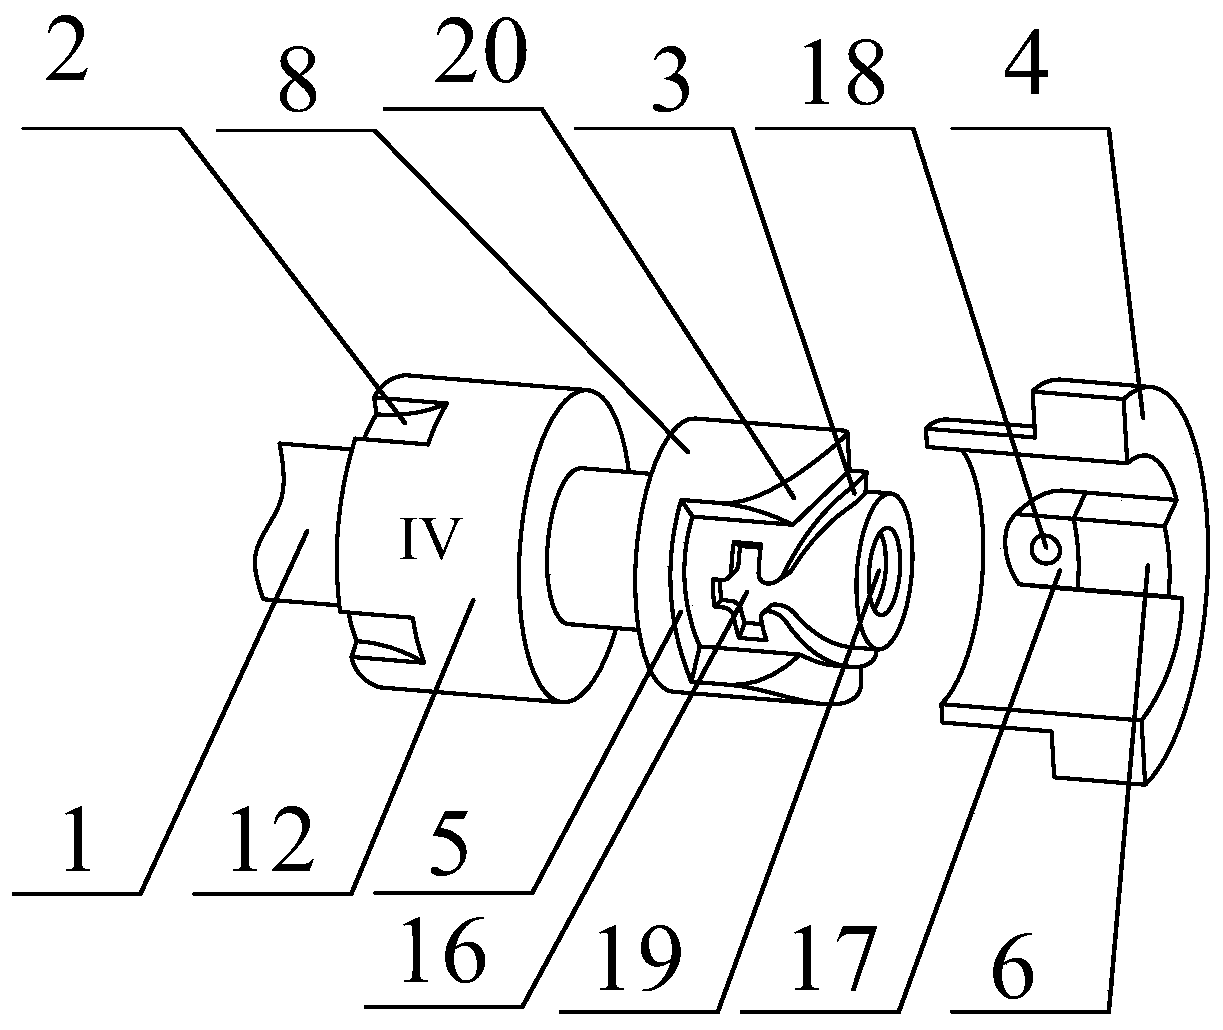 Rotary valve core switching mechanism based on cross limiting port